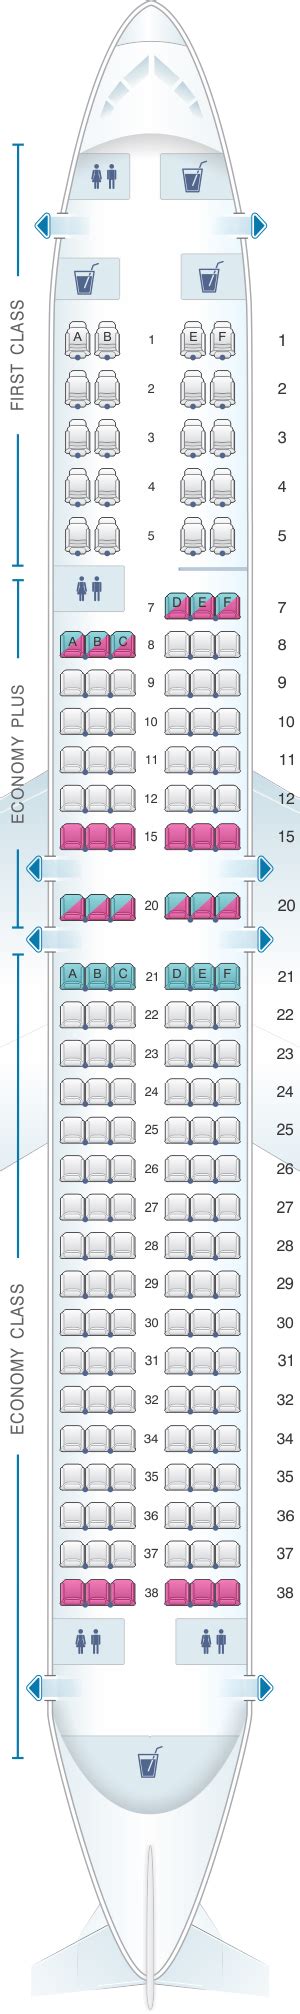 Economy Seat United Airlines Seat Map